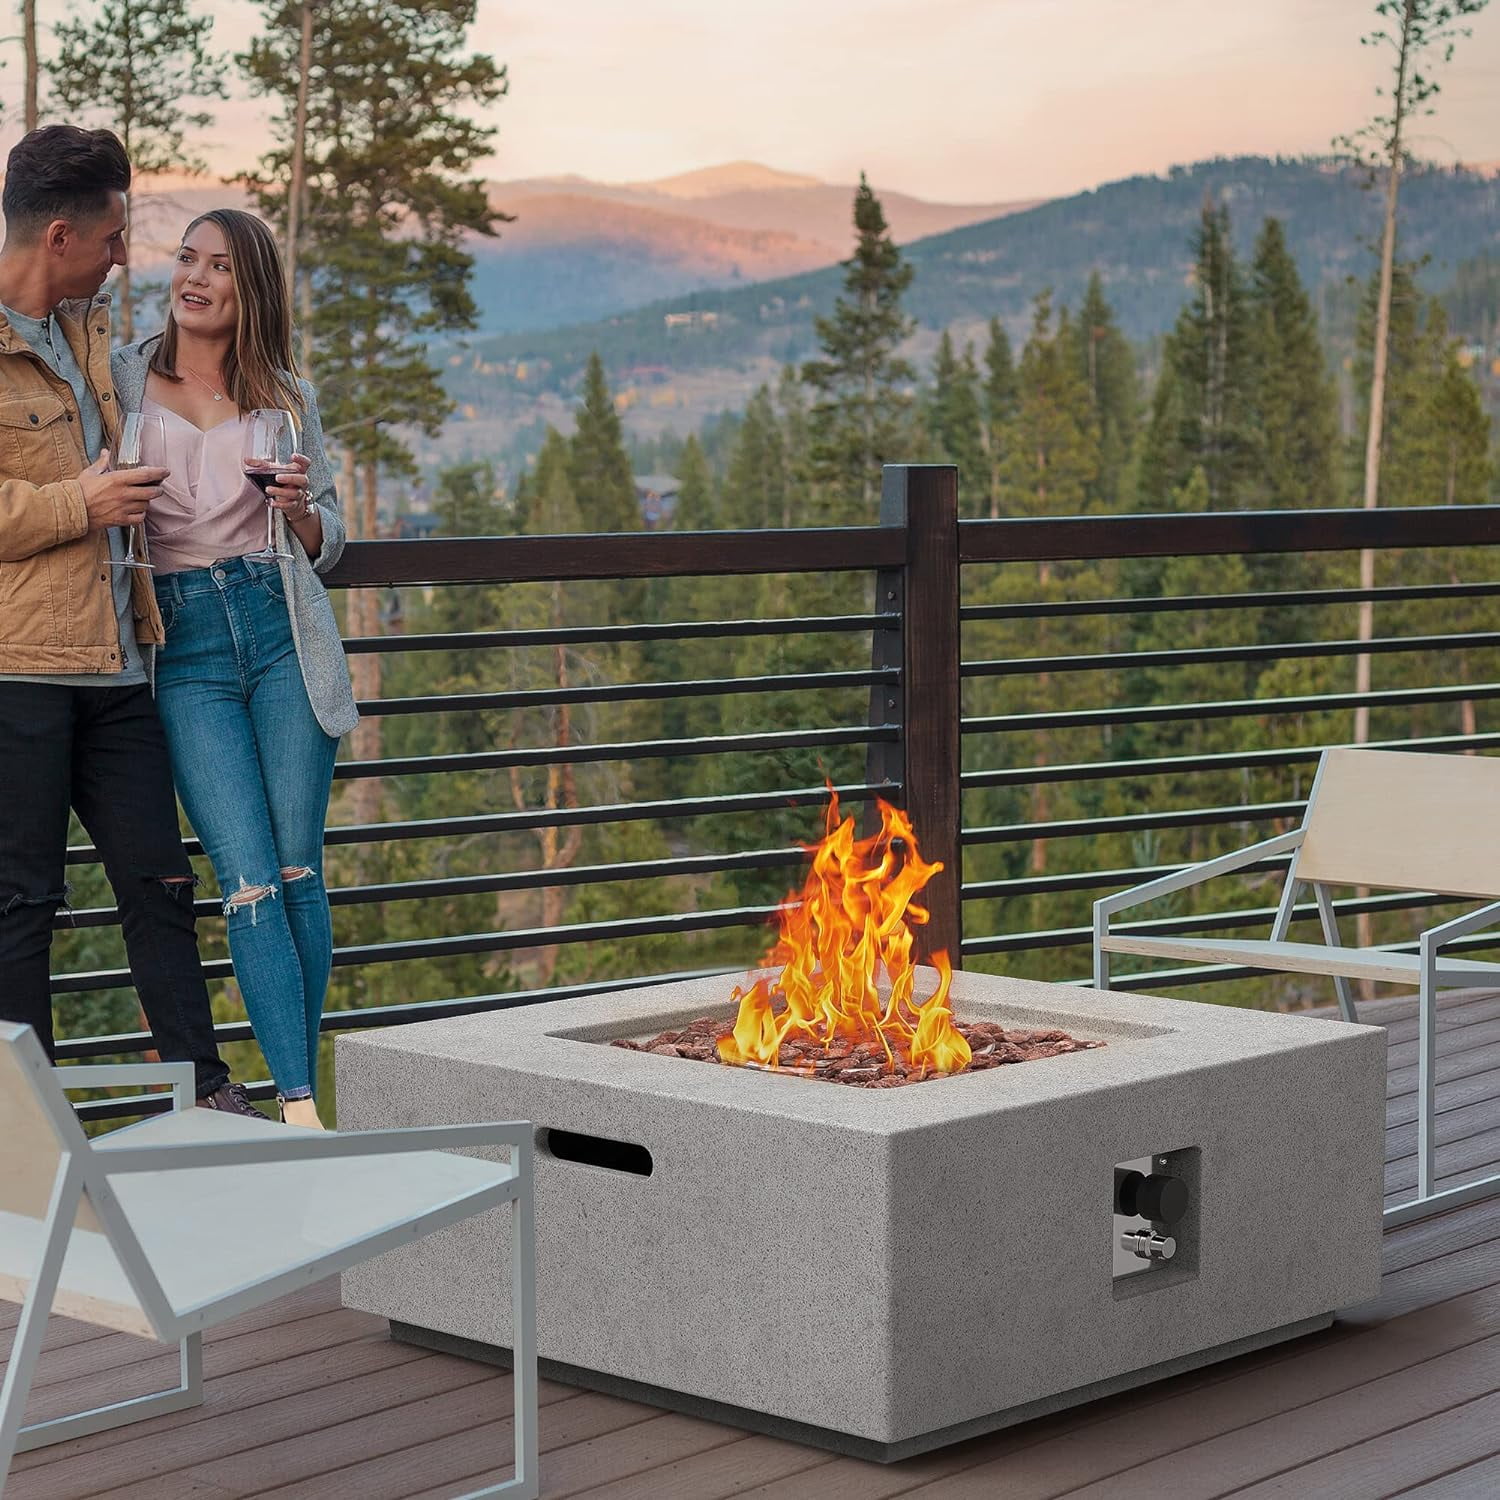 ESSENTIAL LOUNGER Outdoor Propane Fire Pit 50,000 BTU 35-inch Square Concrete Natural Gas Fire Table Outside Smokeless Firepit Furniture with Propane Tank Metal Stand